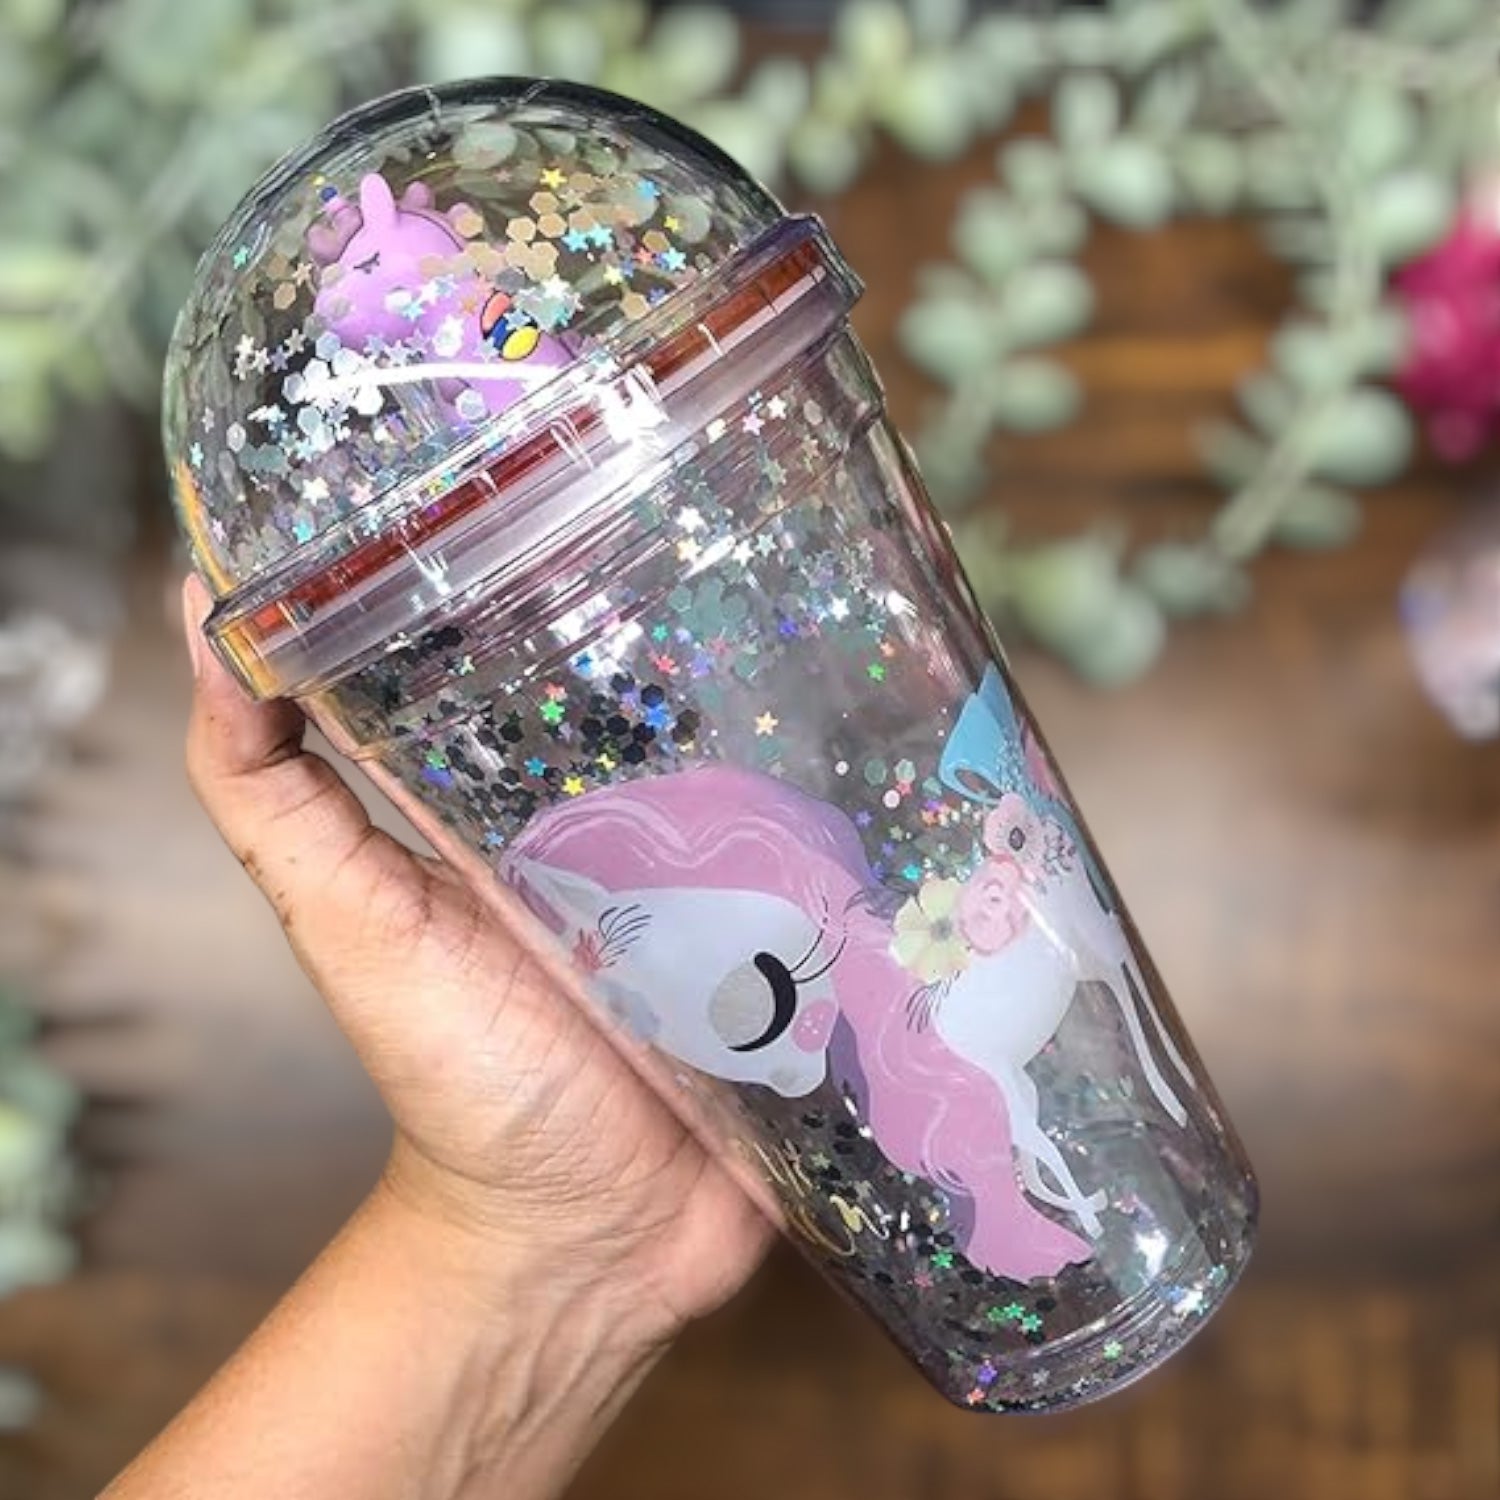 Sipper Bottler with Straw - Unicorn Design | Kid's Cup / Tumbler with Lid | Water Bottle | Fruit Juice Mug for Kids - For Kids Birthday Gift & Return Gift Success - Apkamart #Style_pack of 3